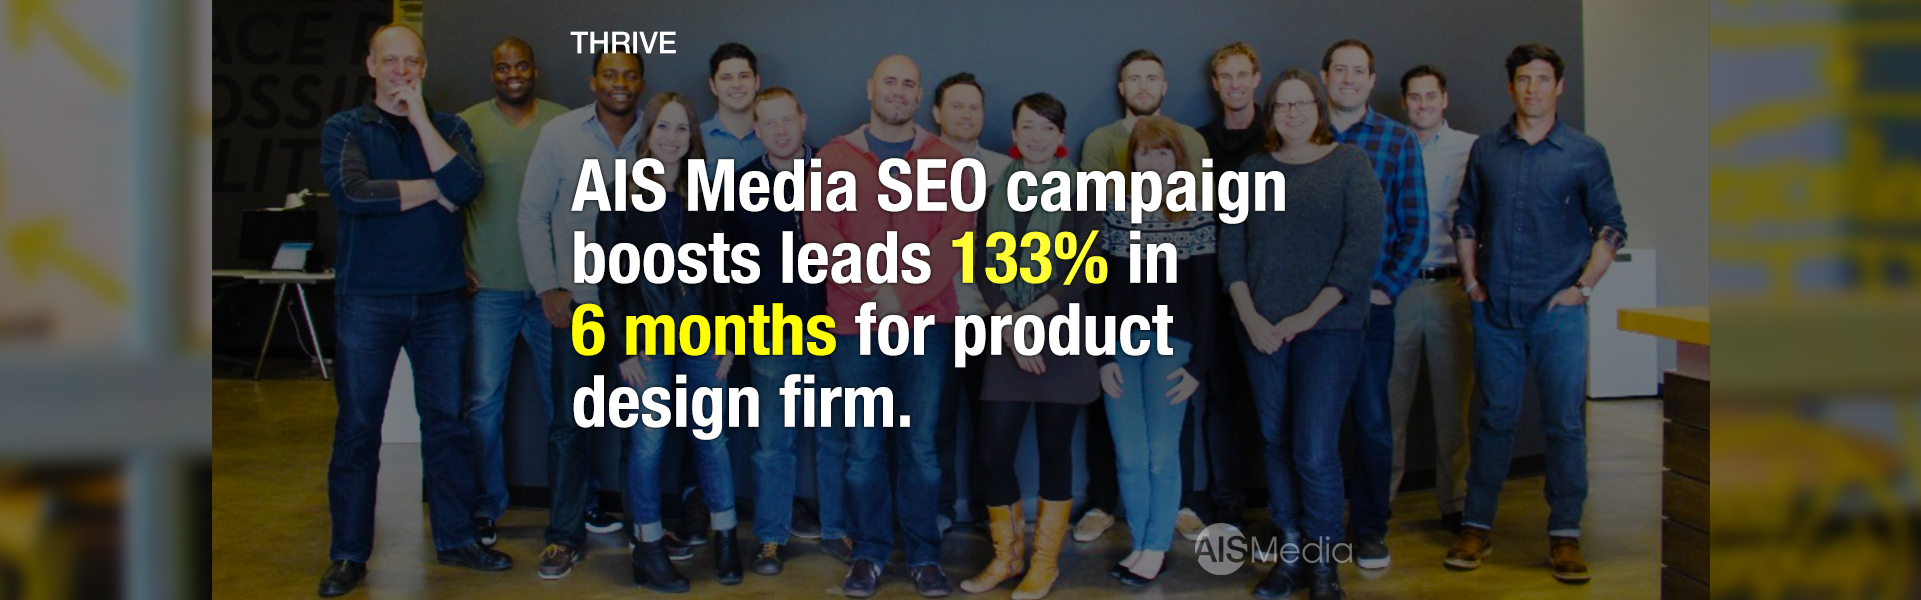 AIS Media SEO campaign boosts leads 133 percent in 6 months for product design firm